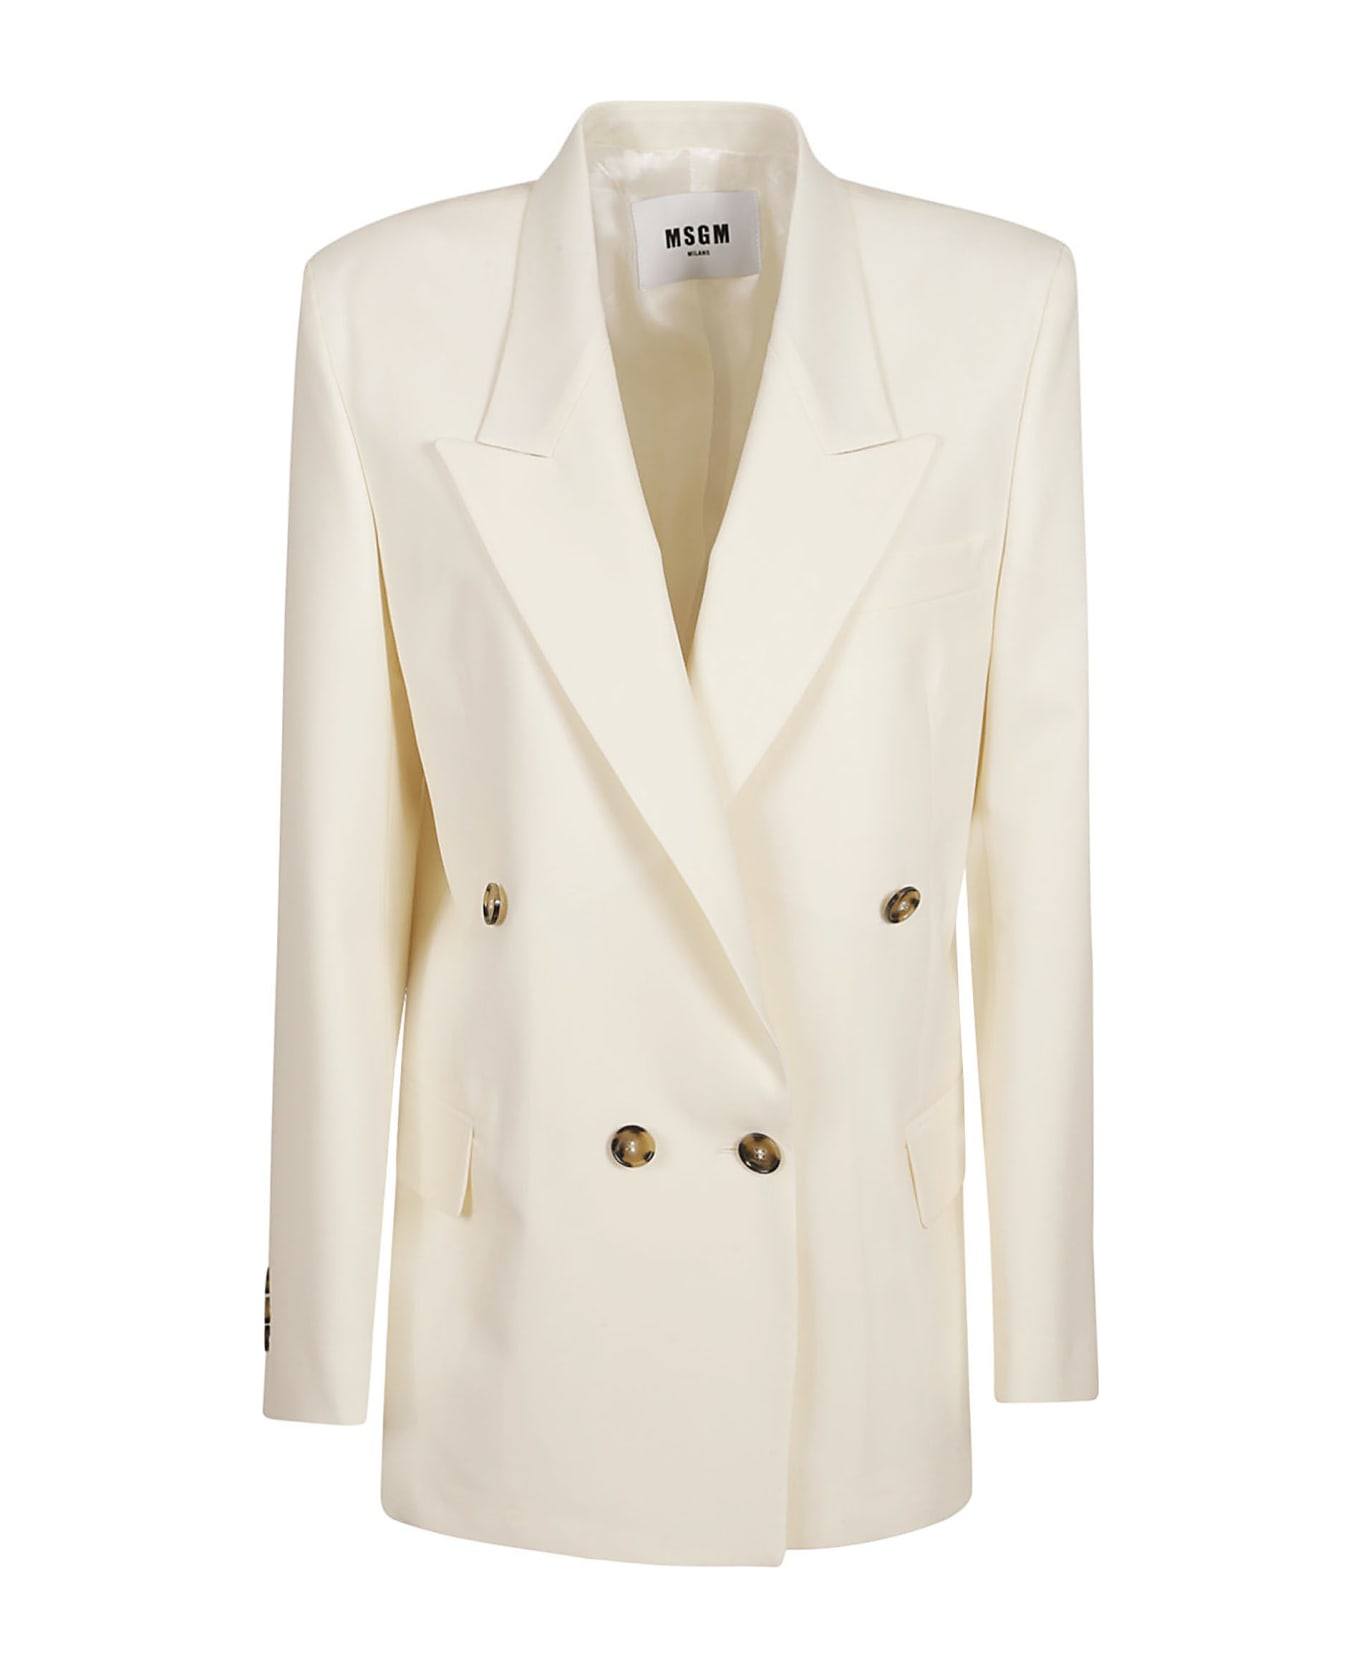 MSGM Double-breasted Classic Blazer - OFf-White